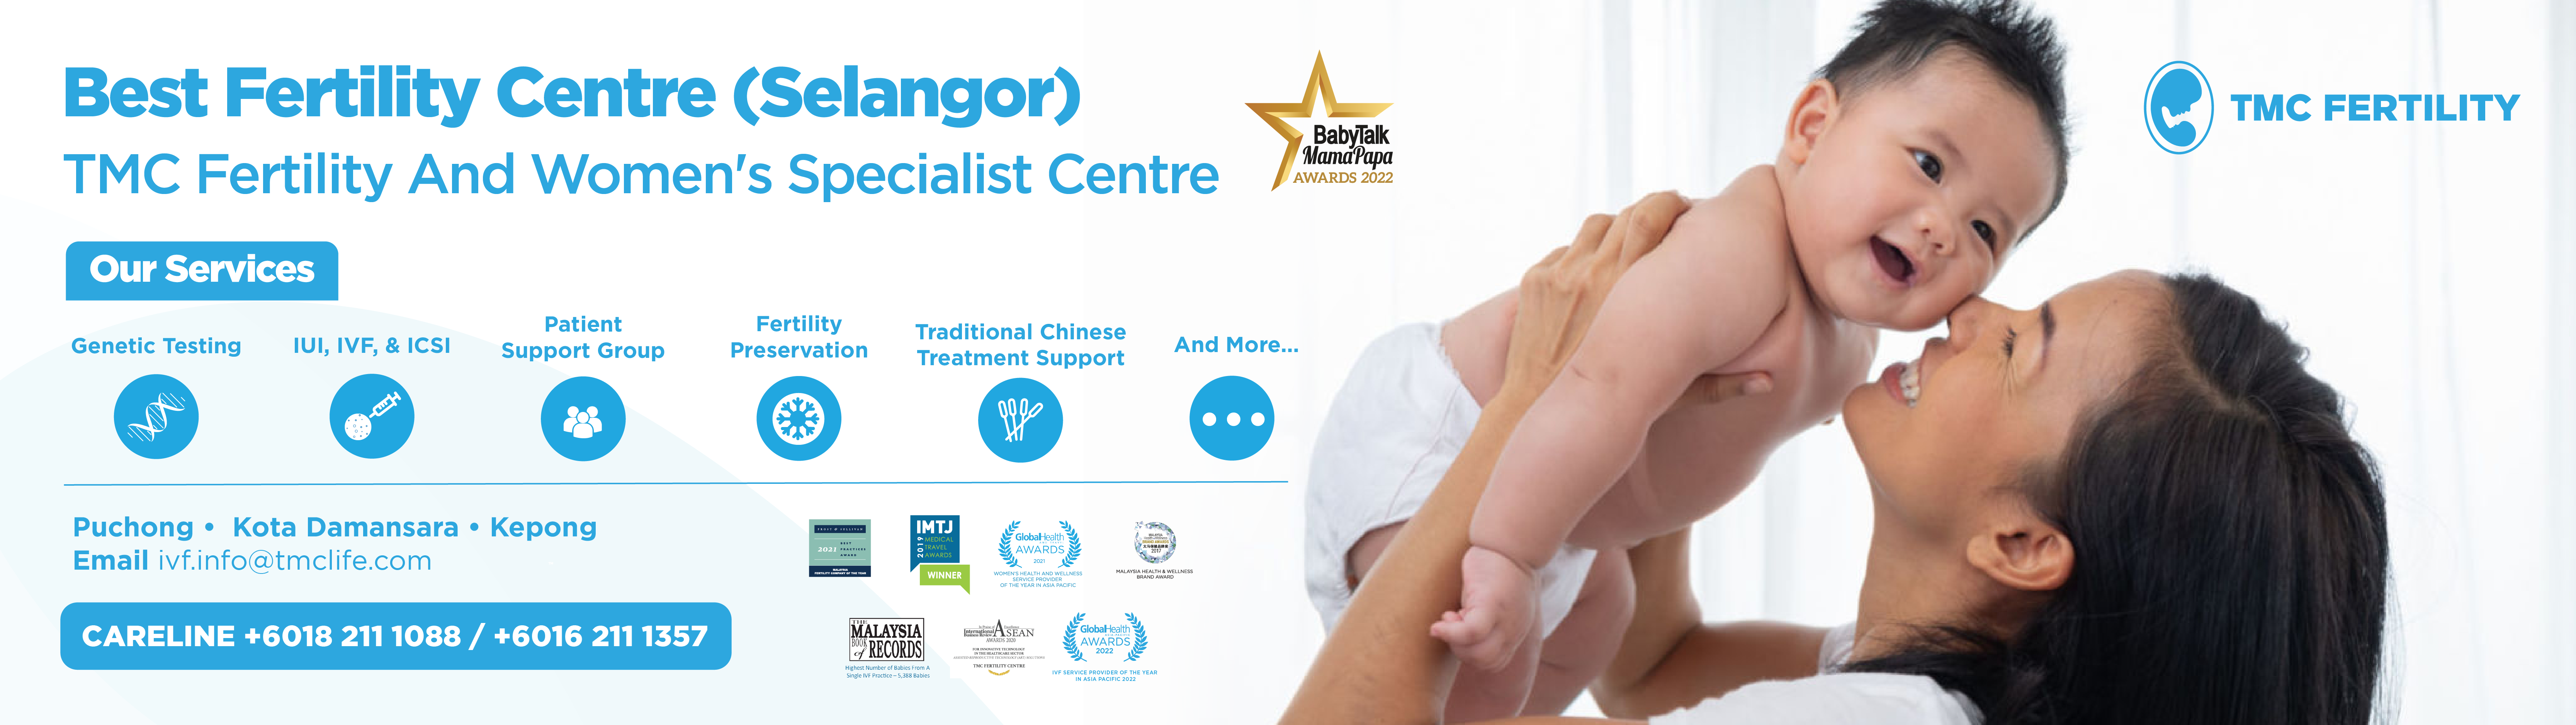 The Fertility Specialist Centre of Choice in Selangor